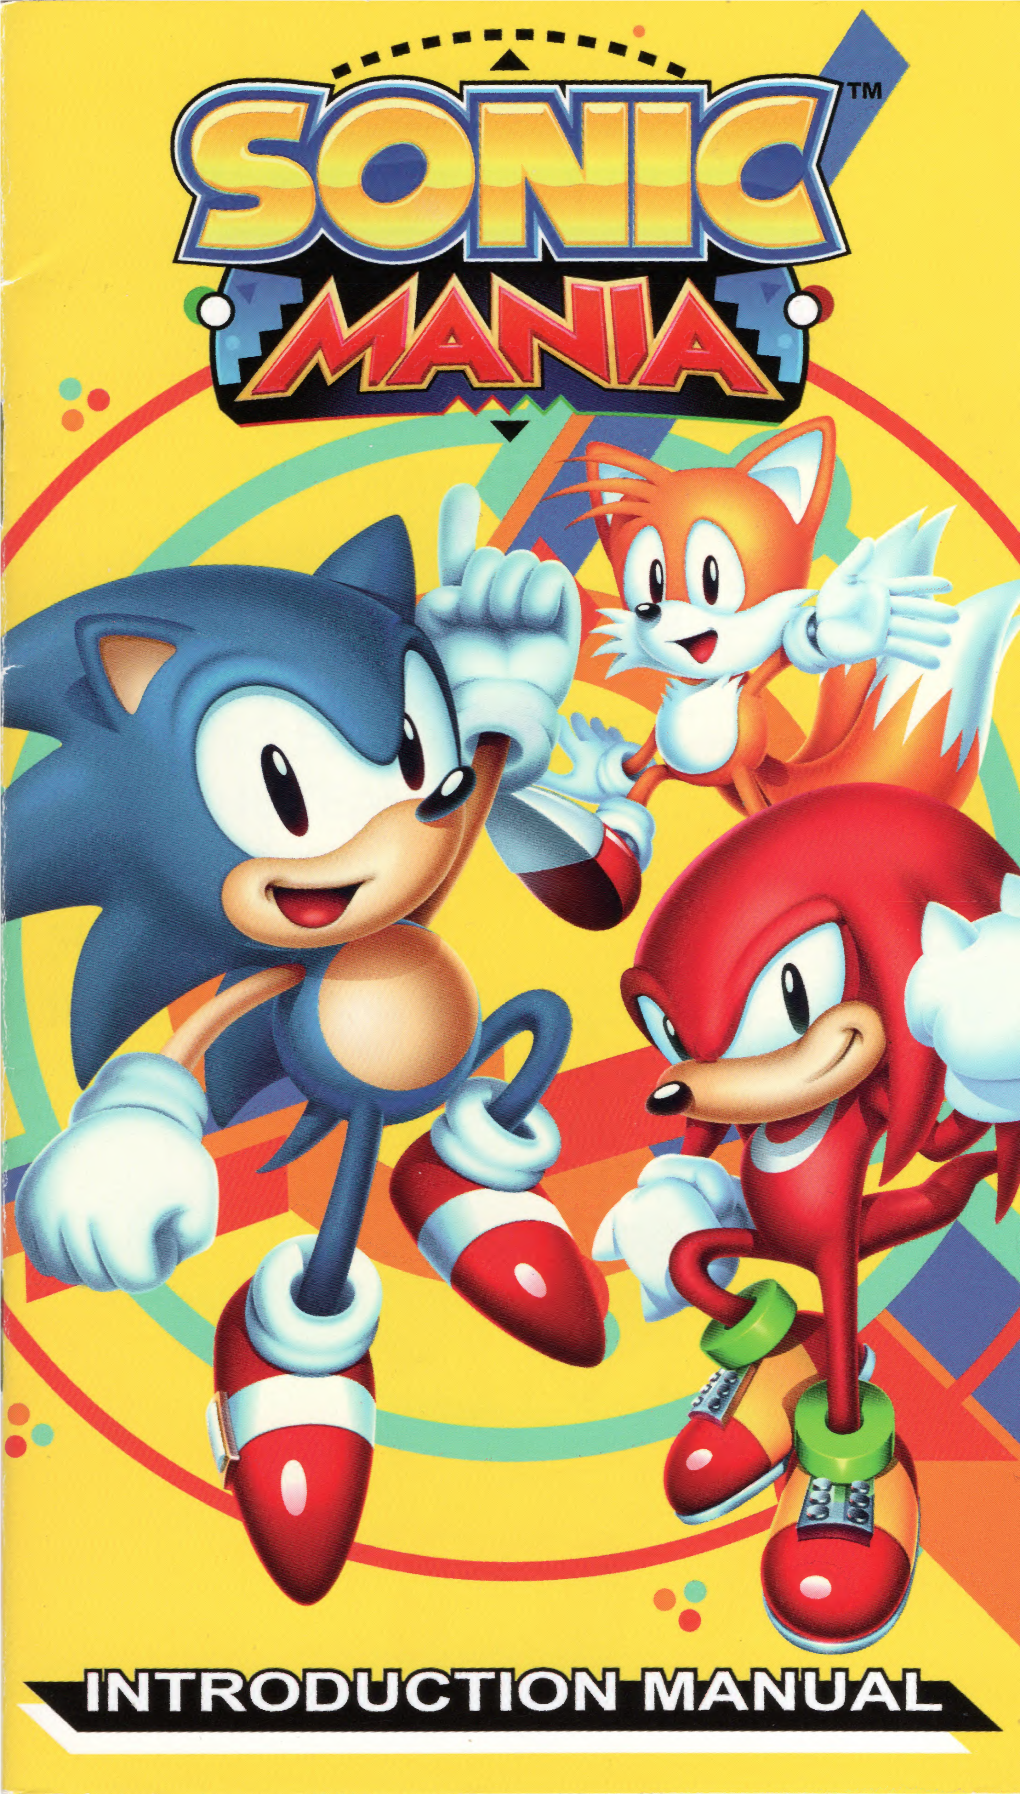 Sonic Mania Introduction Manual